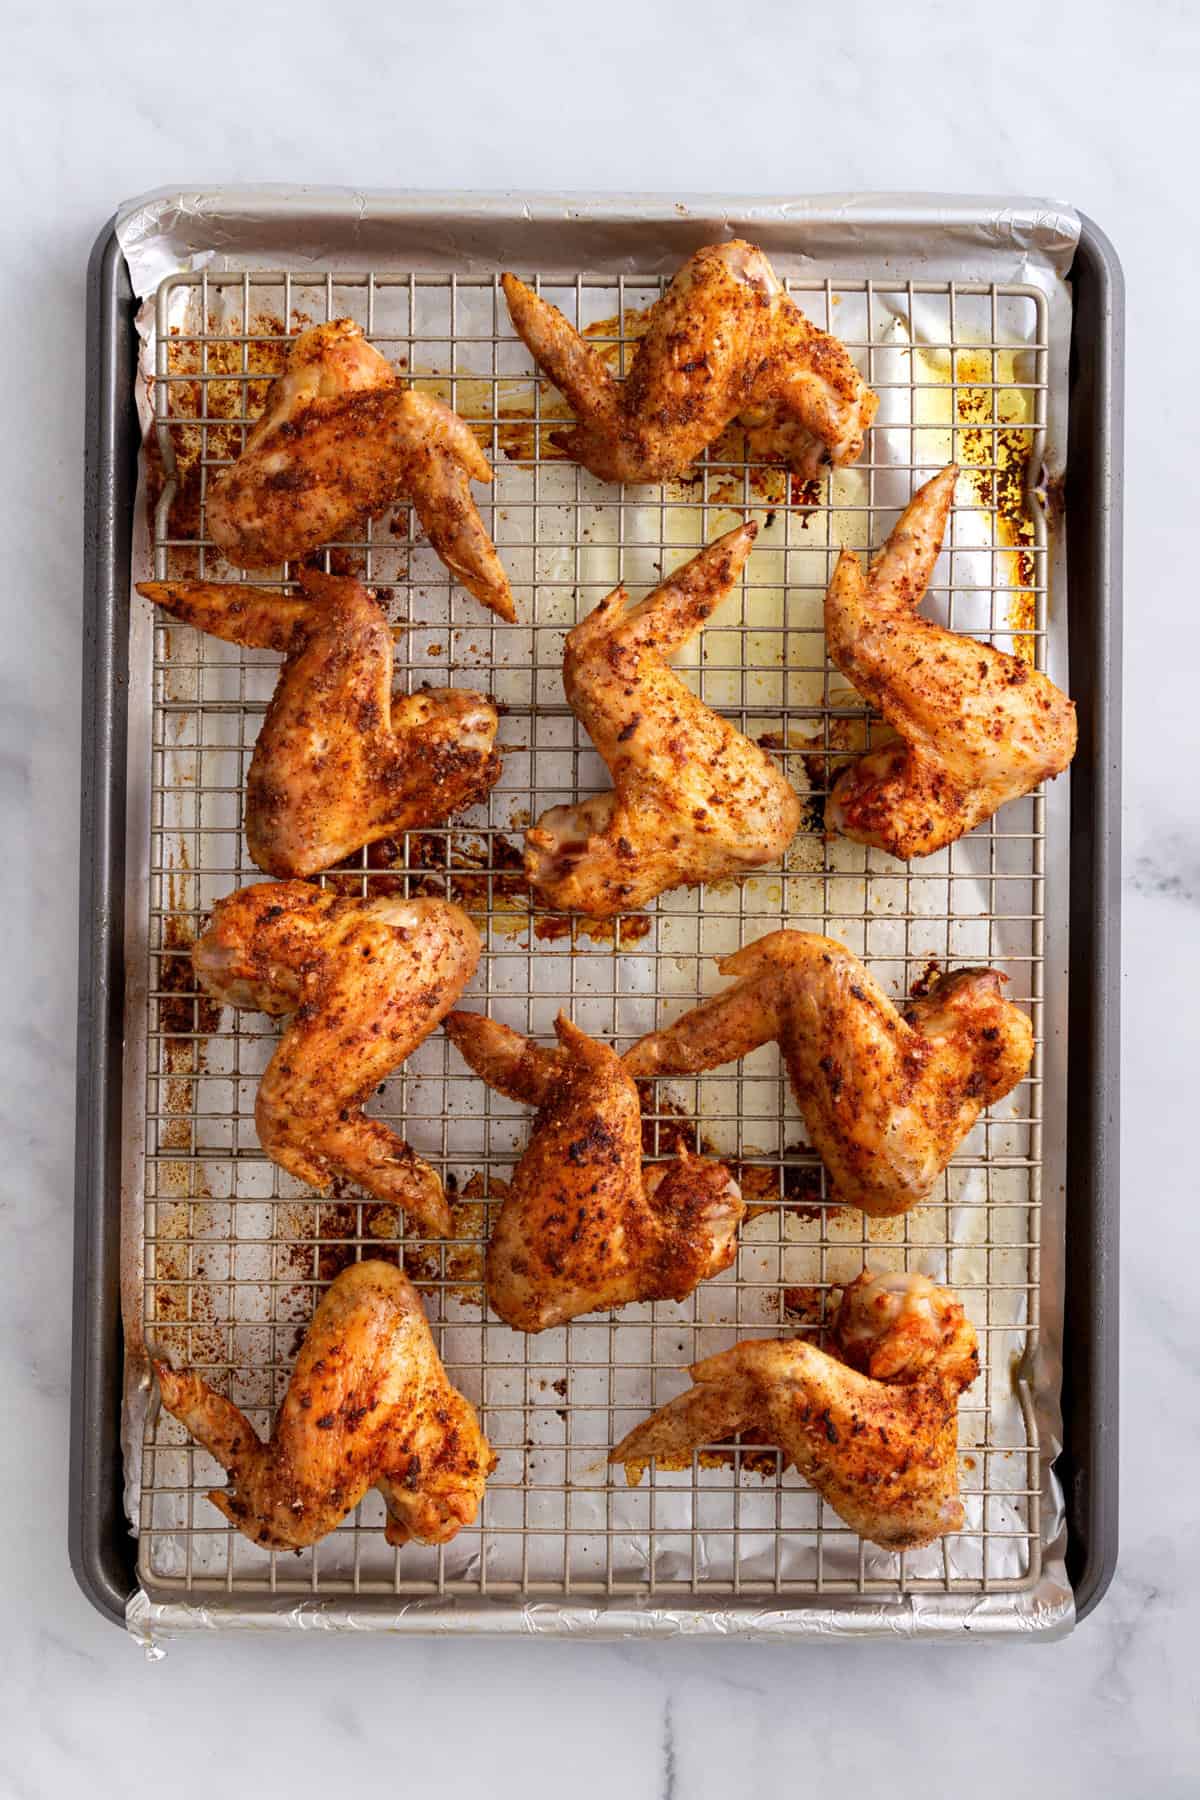 seasoned uncooked chicken wings sitting on a wire rack and foil-lined baking sheet